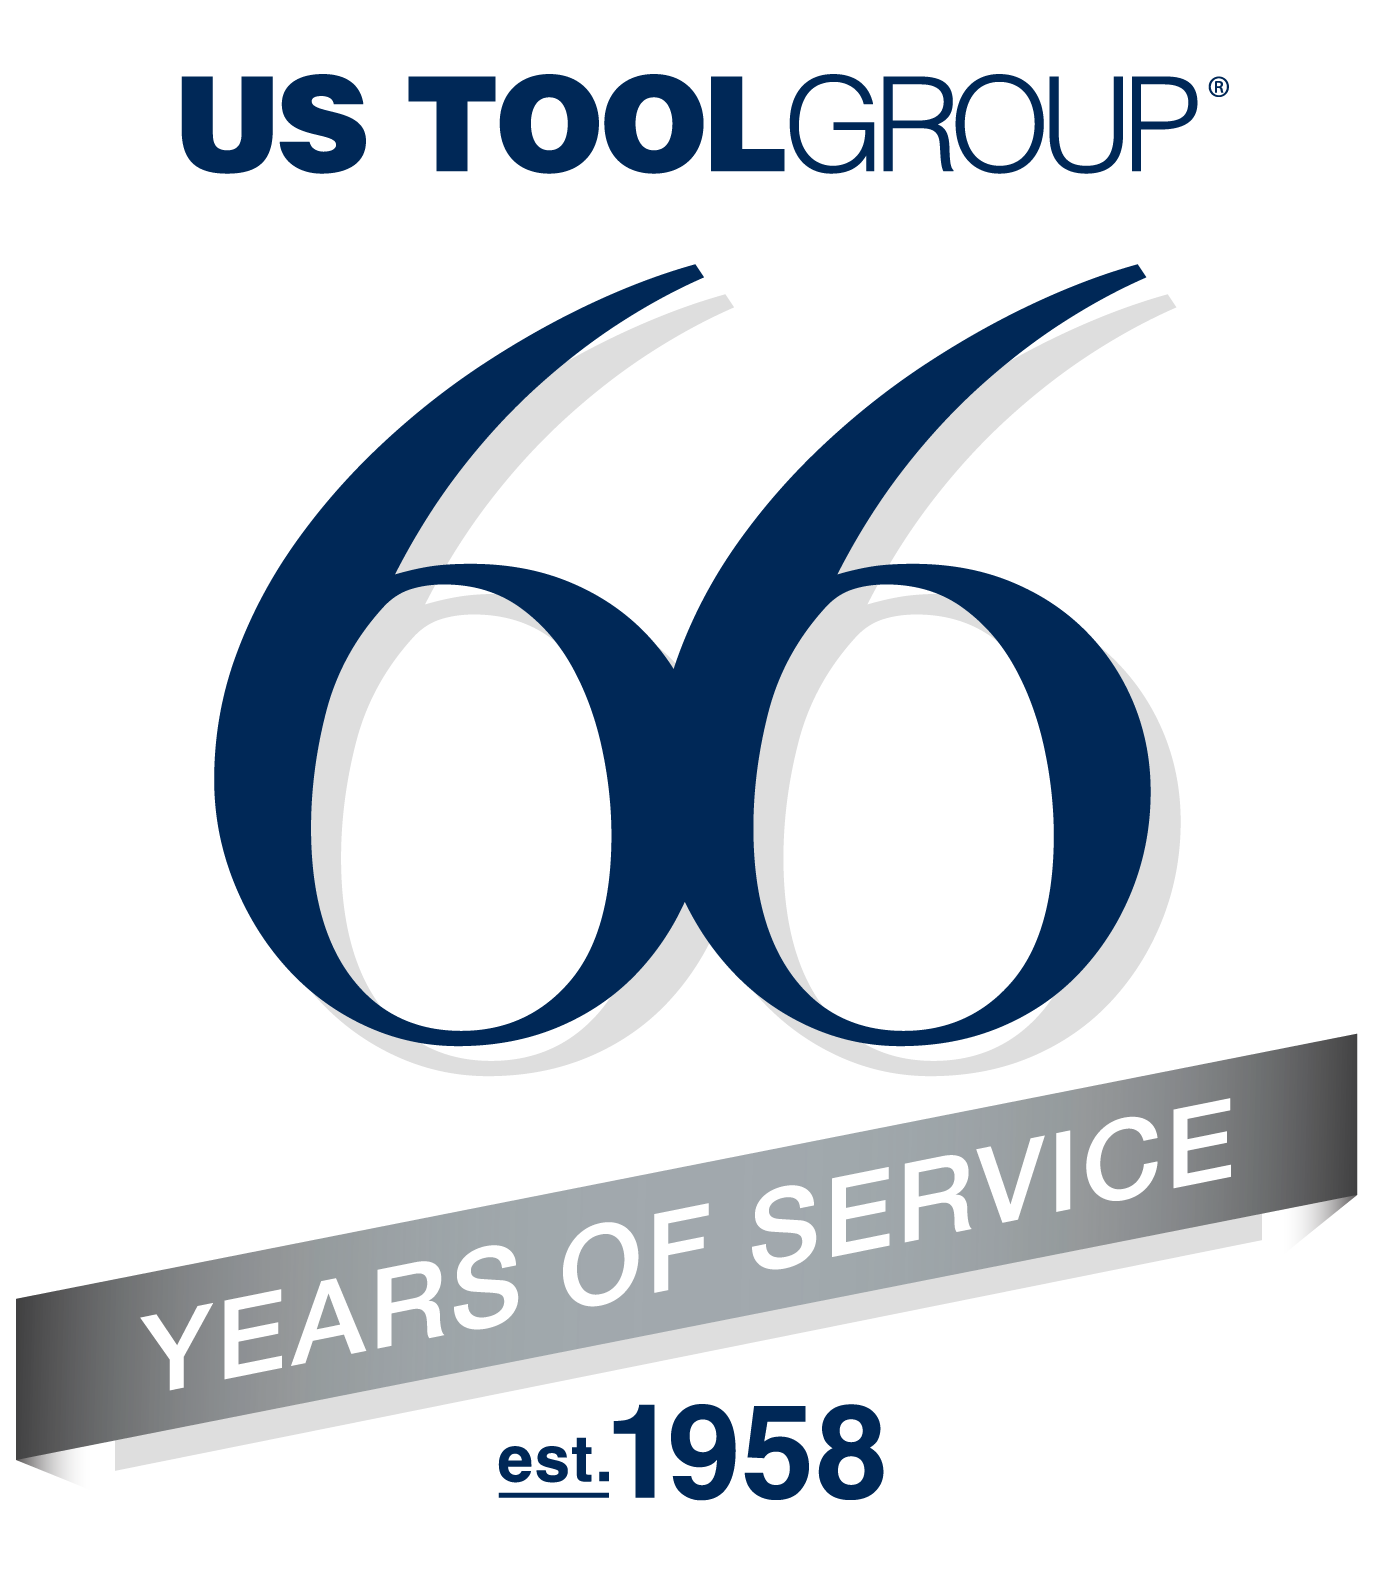 US Tool Group - 66 Years of Service